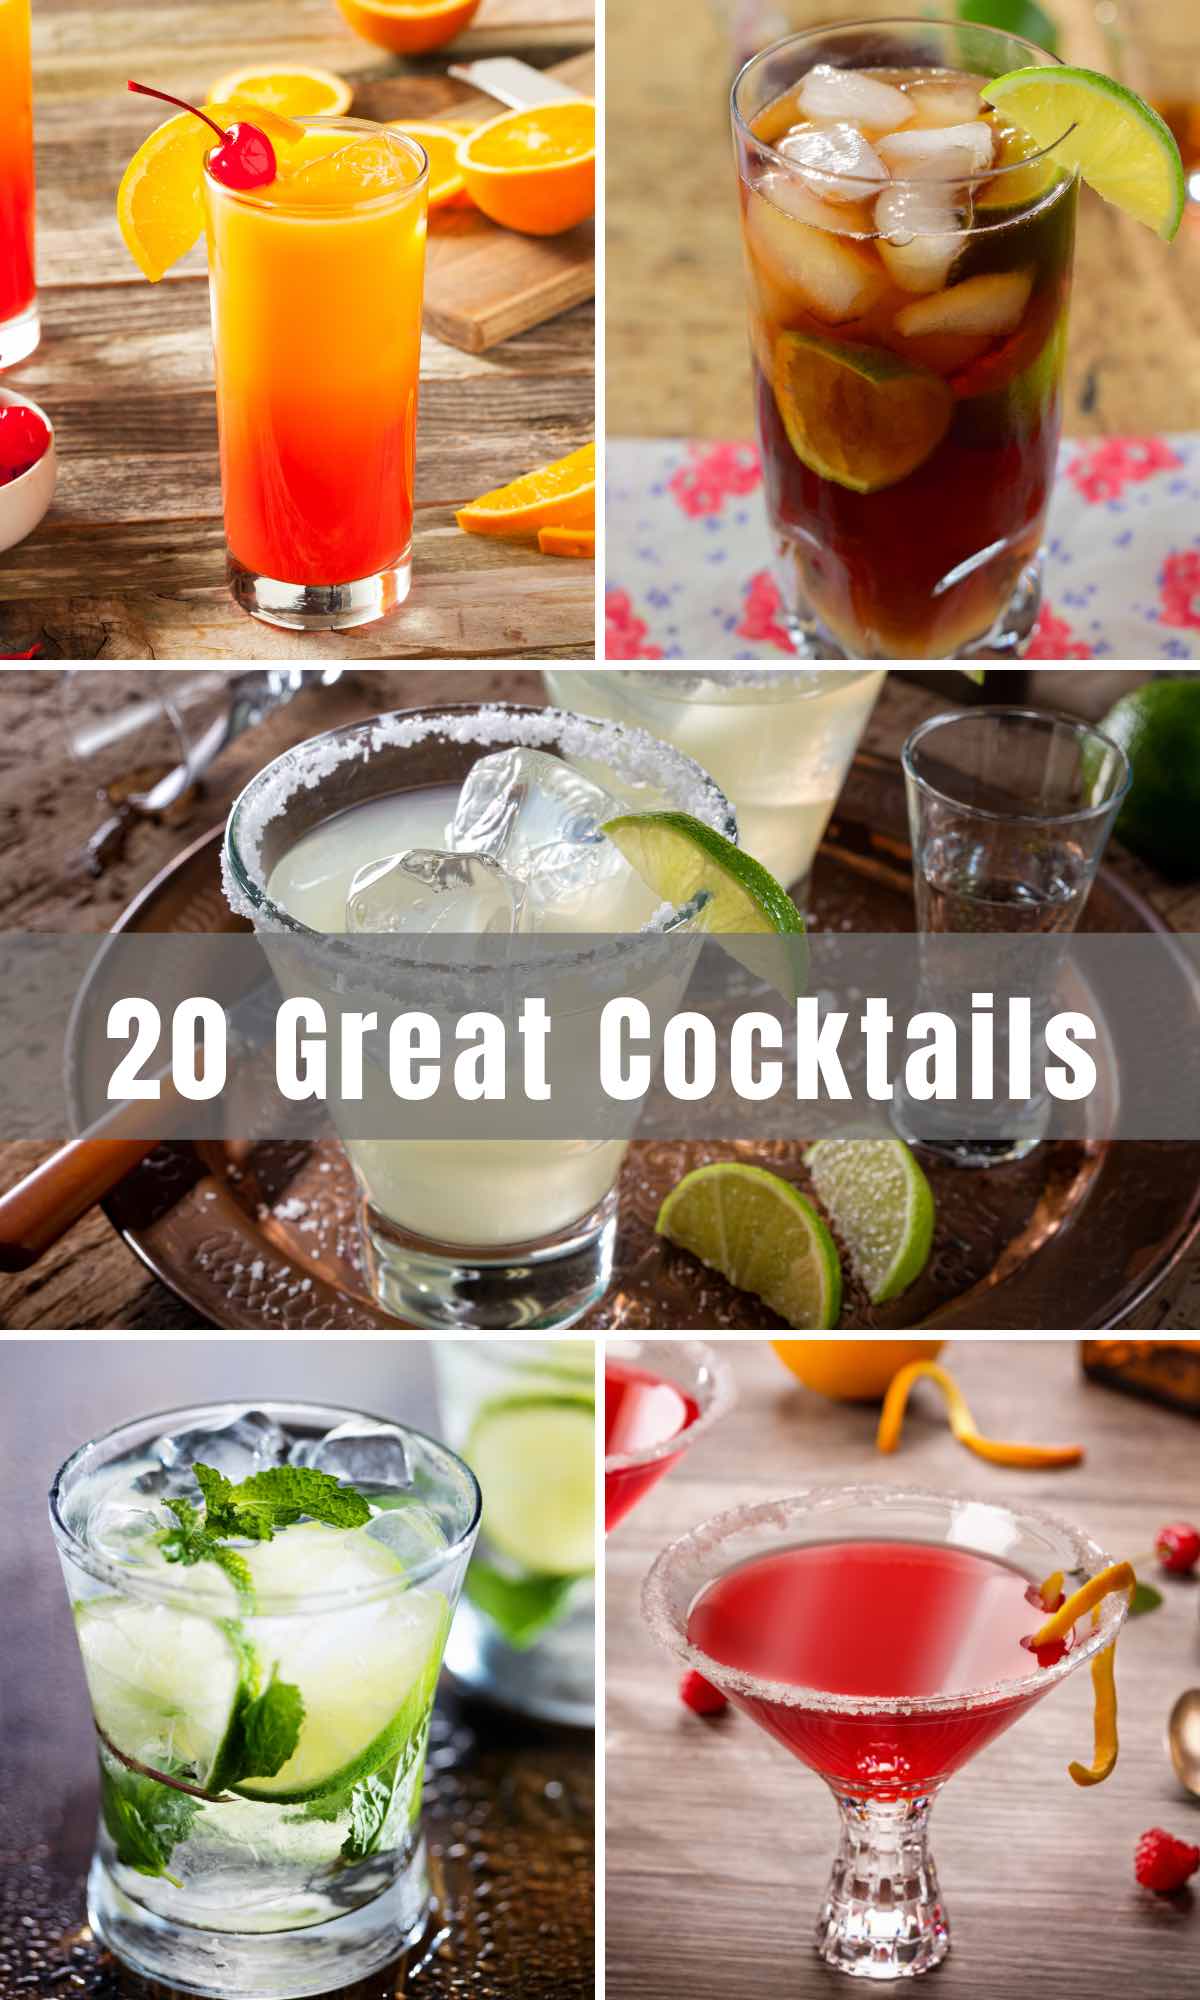 GREAT COCKTAIL RECIPES TO MAKE AT HOME